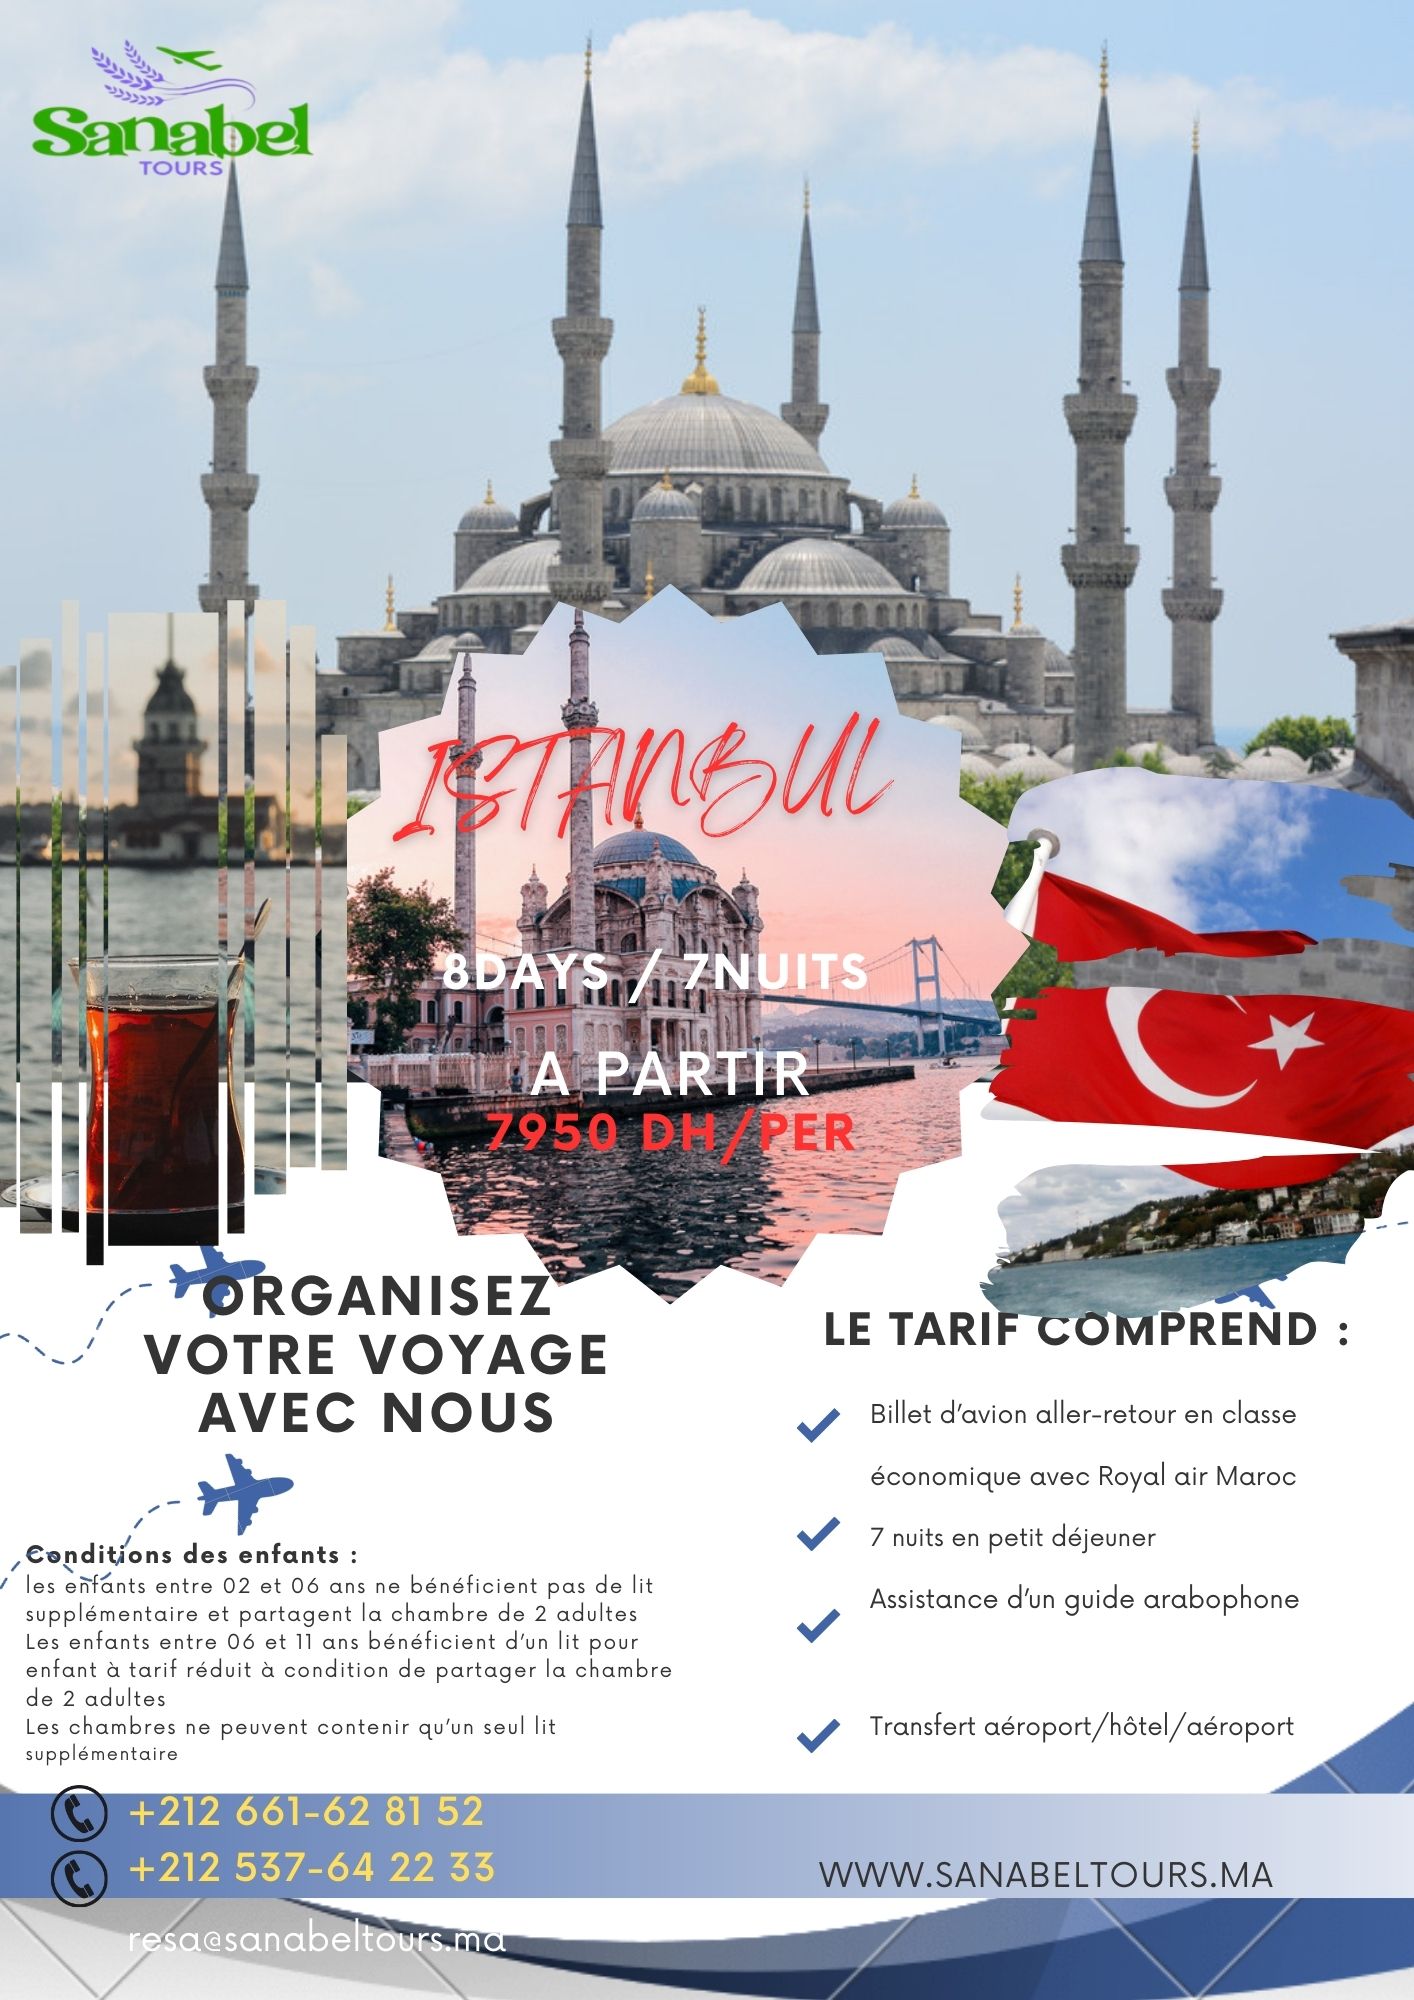 8 DAYS IN ISTANBUL